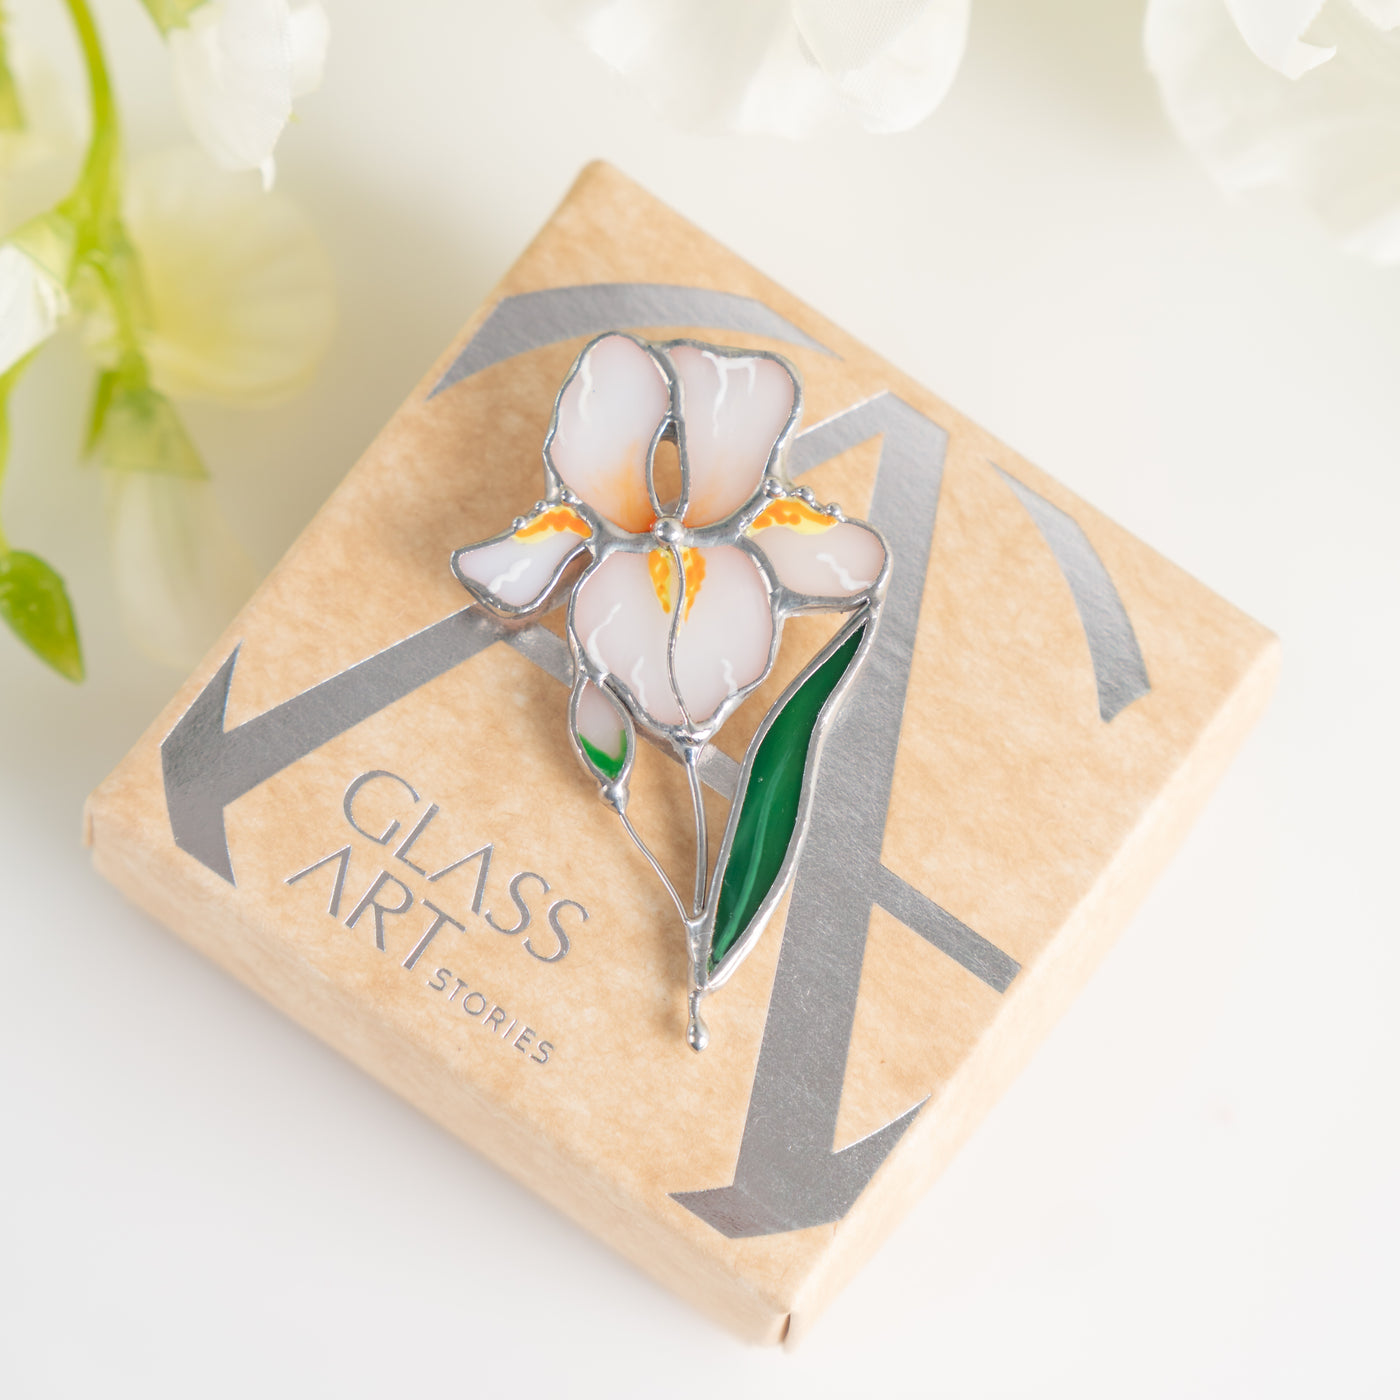 Stained glass iris flower pin with the brand box